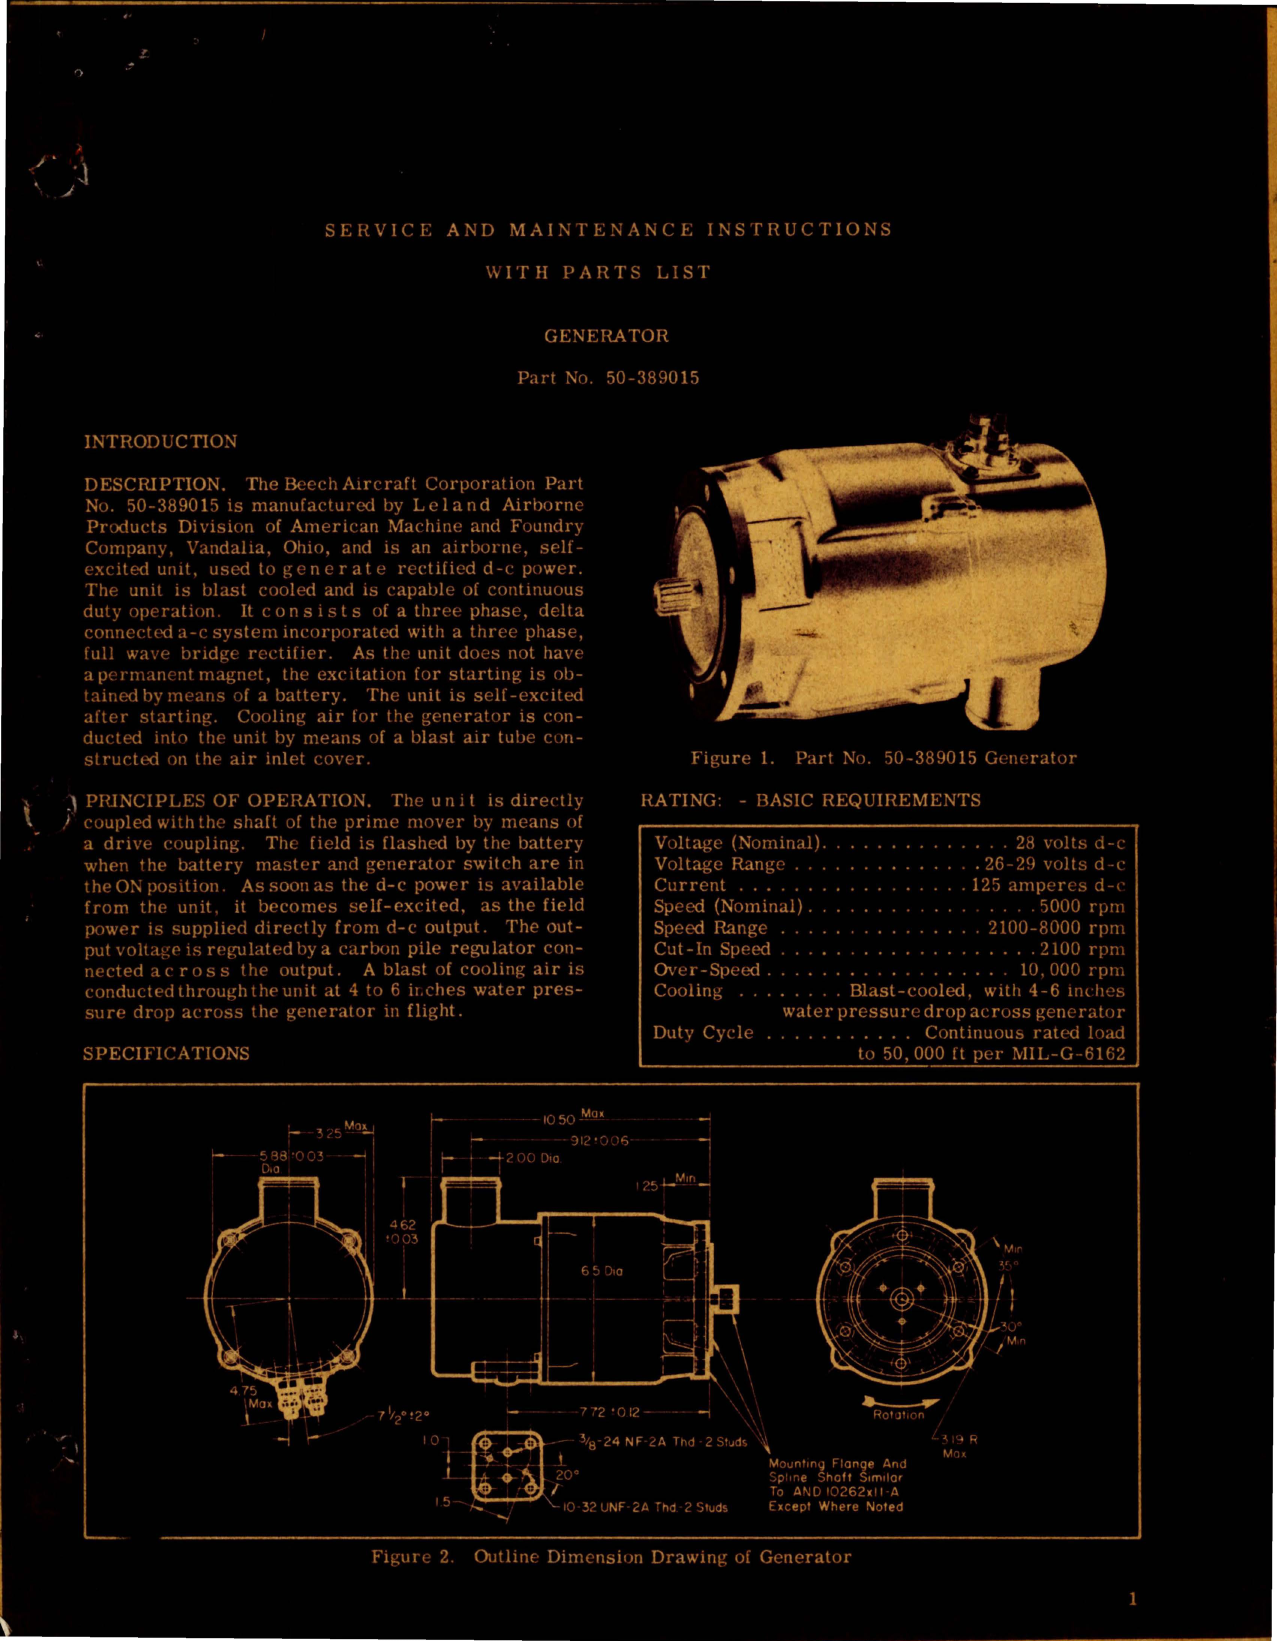 Sample page 1 from AirCorps Library document: Service and Maintenance Instructions with Parts List for Generator - Part 50-389015 